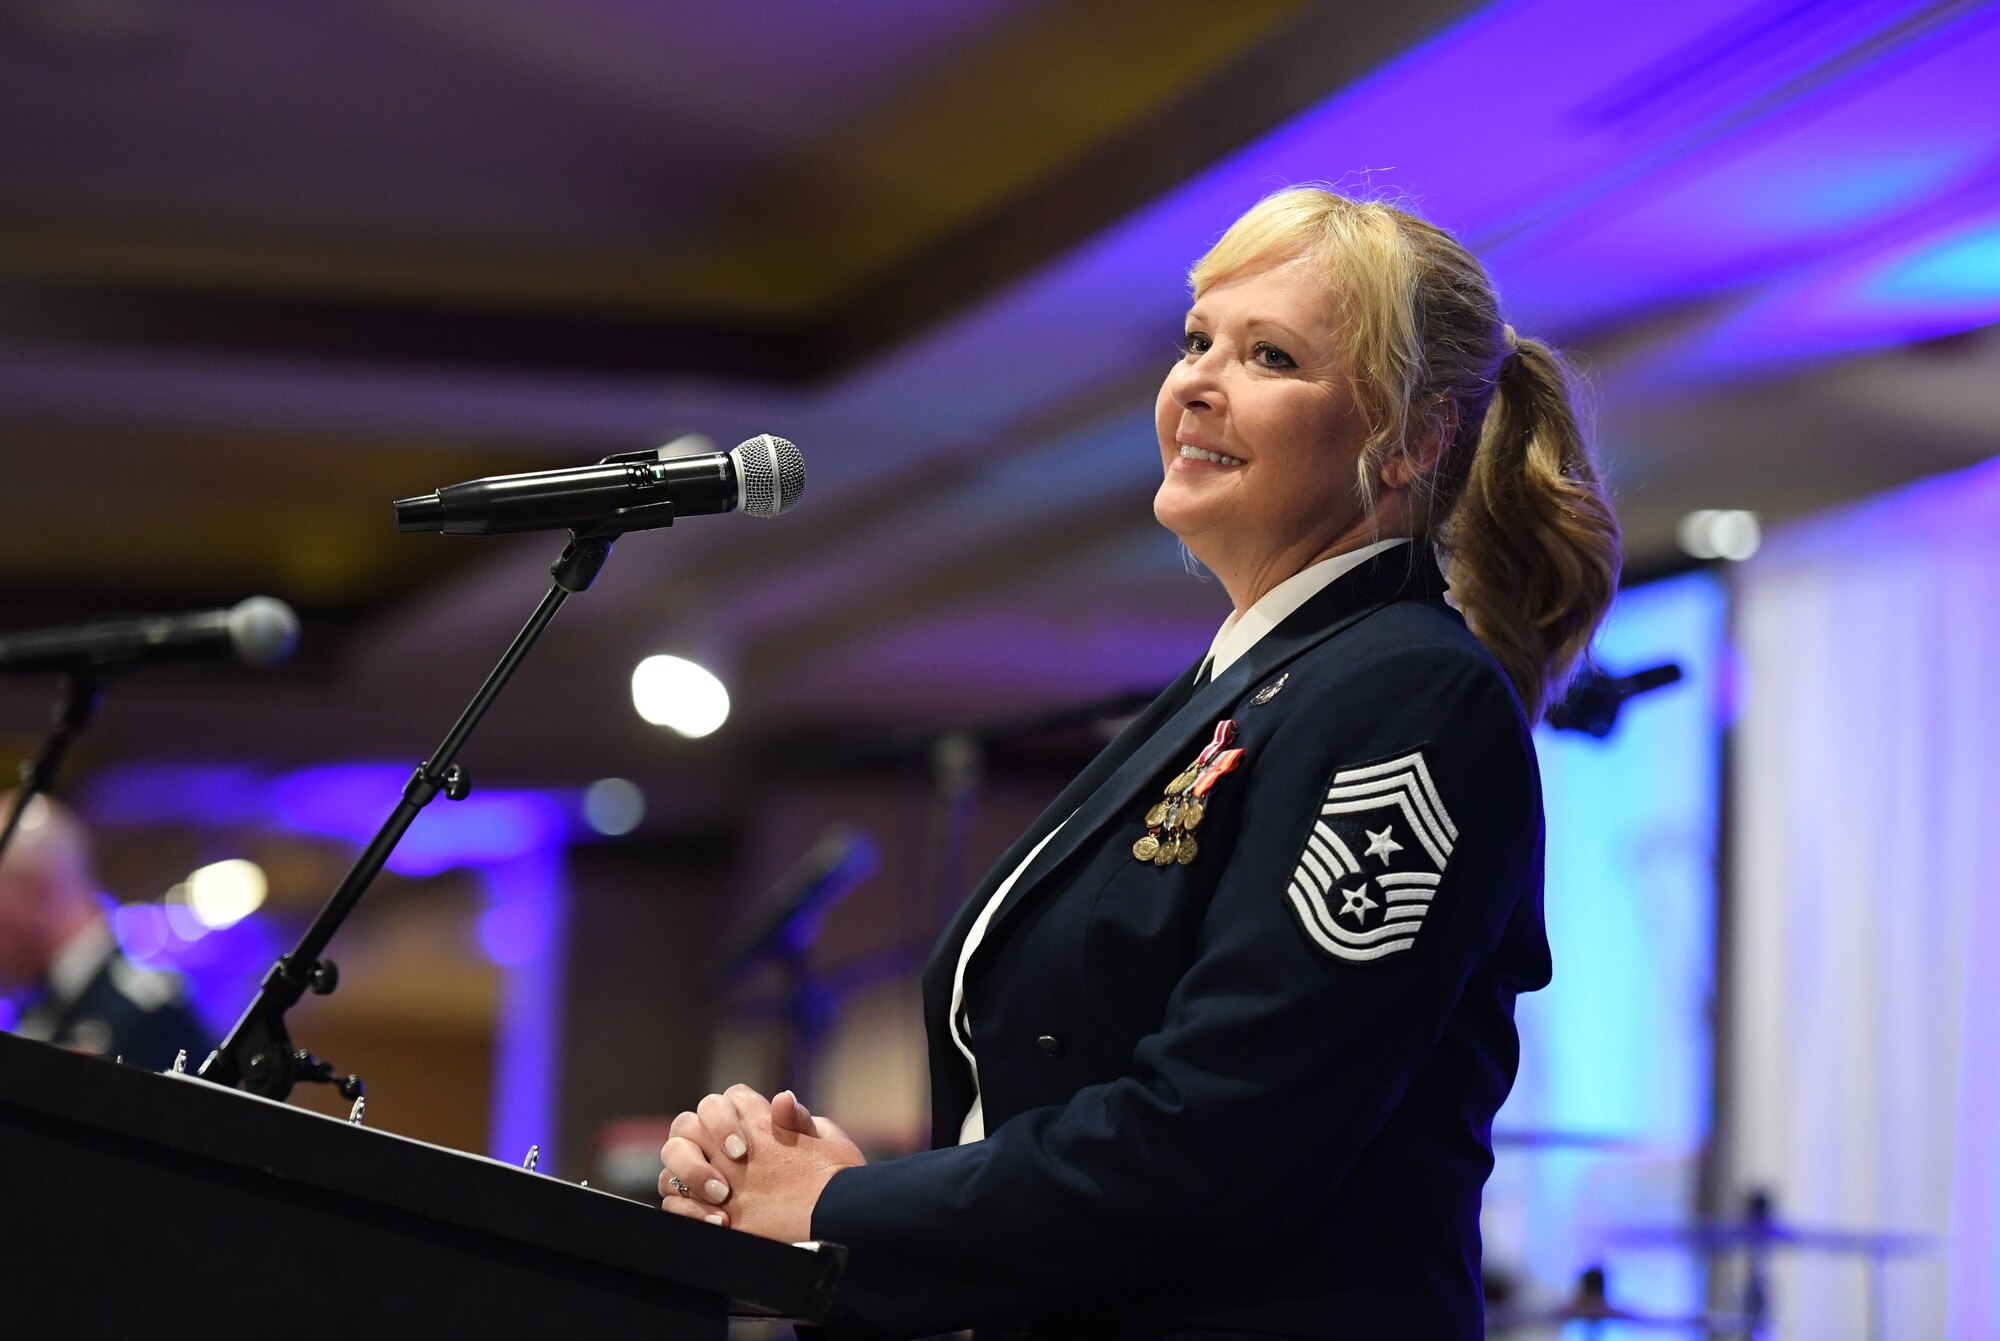 U.S. Air Force Chief Master Sgt. Sarah Esparza, 81st Training Wing command chief, delivers remarks during the Keesler Air Force Ball inside the IP Casino Resort Spa at Biloxi, Mississippi, Sept. 17, 2022. The event, which celebrated the Air Force's 75th birthday, also included a cake cutting ceremony. (U.S. Air Force photo by Kemberly Groue)